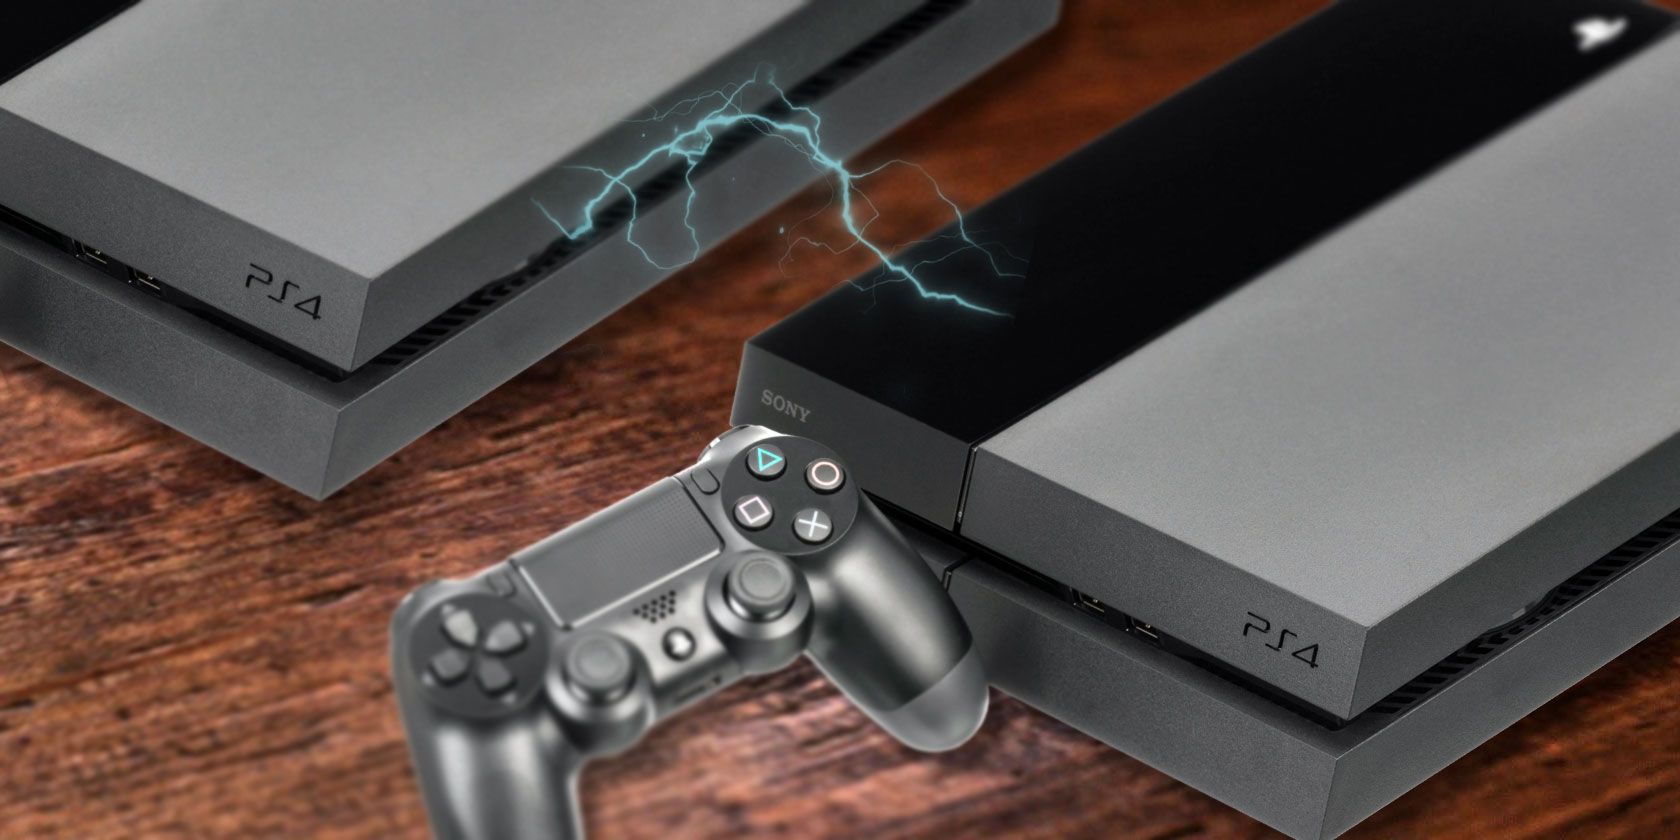 How Transfer Data From Your PS4 to New PS4